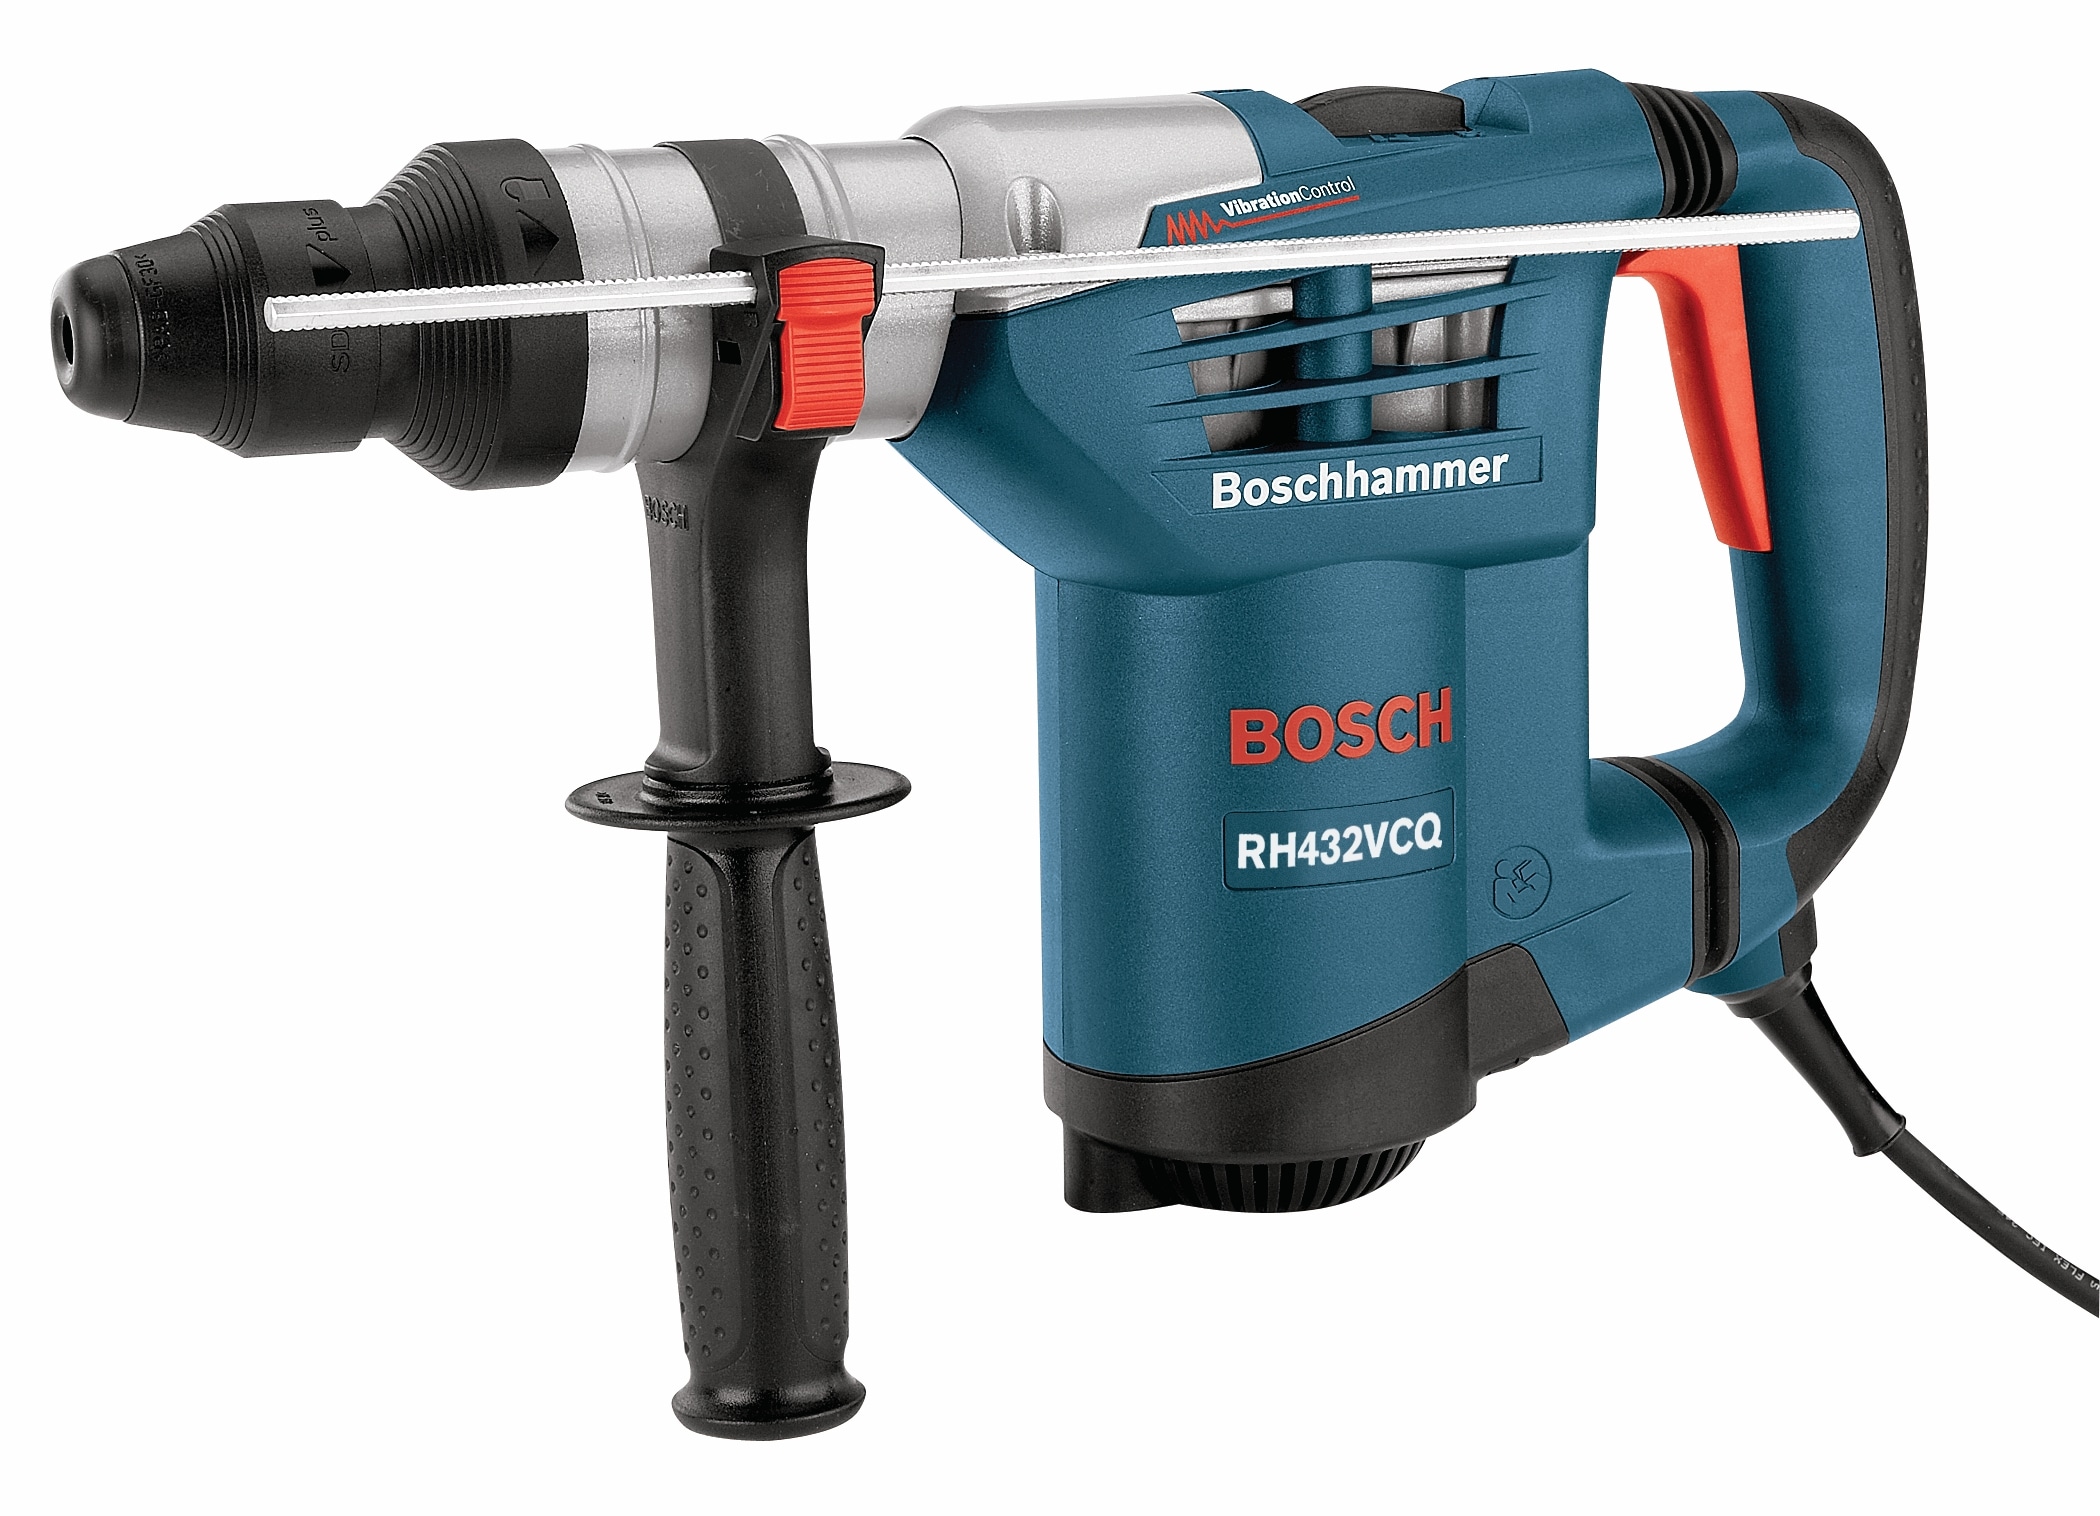 Bosch 8.5-Amp 3/4-in Sds-plus Variable Speed Corded Rotary Hammer Drill ...